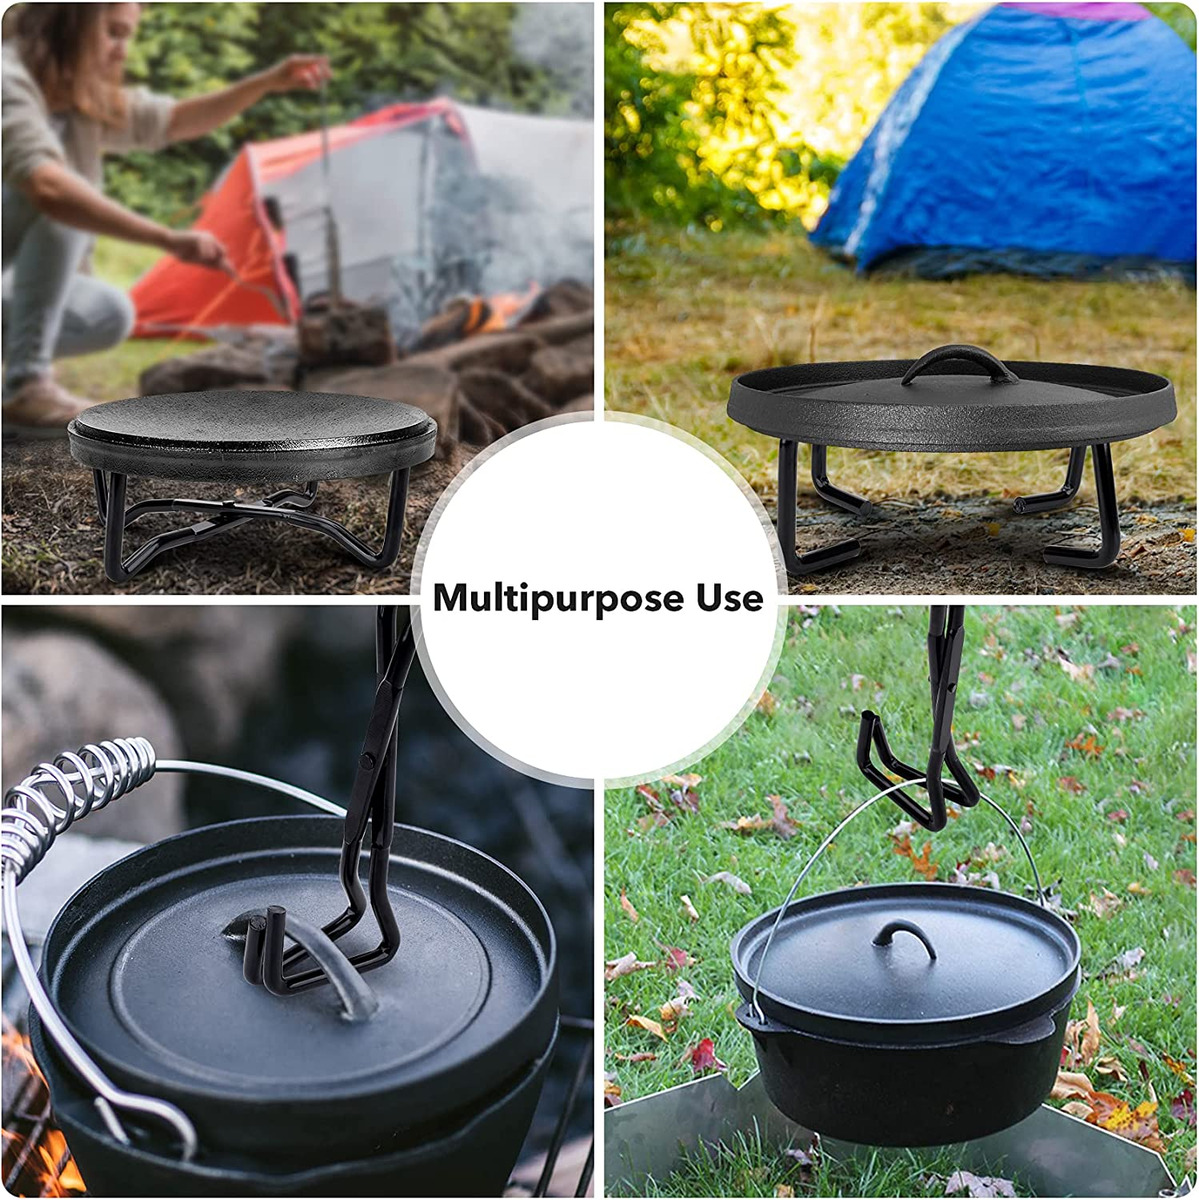 Cast Iron Camp Dutch Oven Lid Stand, 4-In-1 Folding Pot Stand/Camp